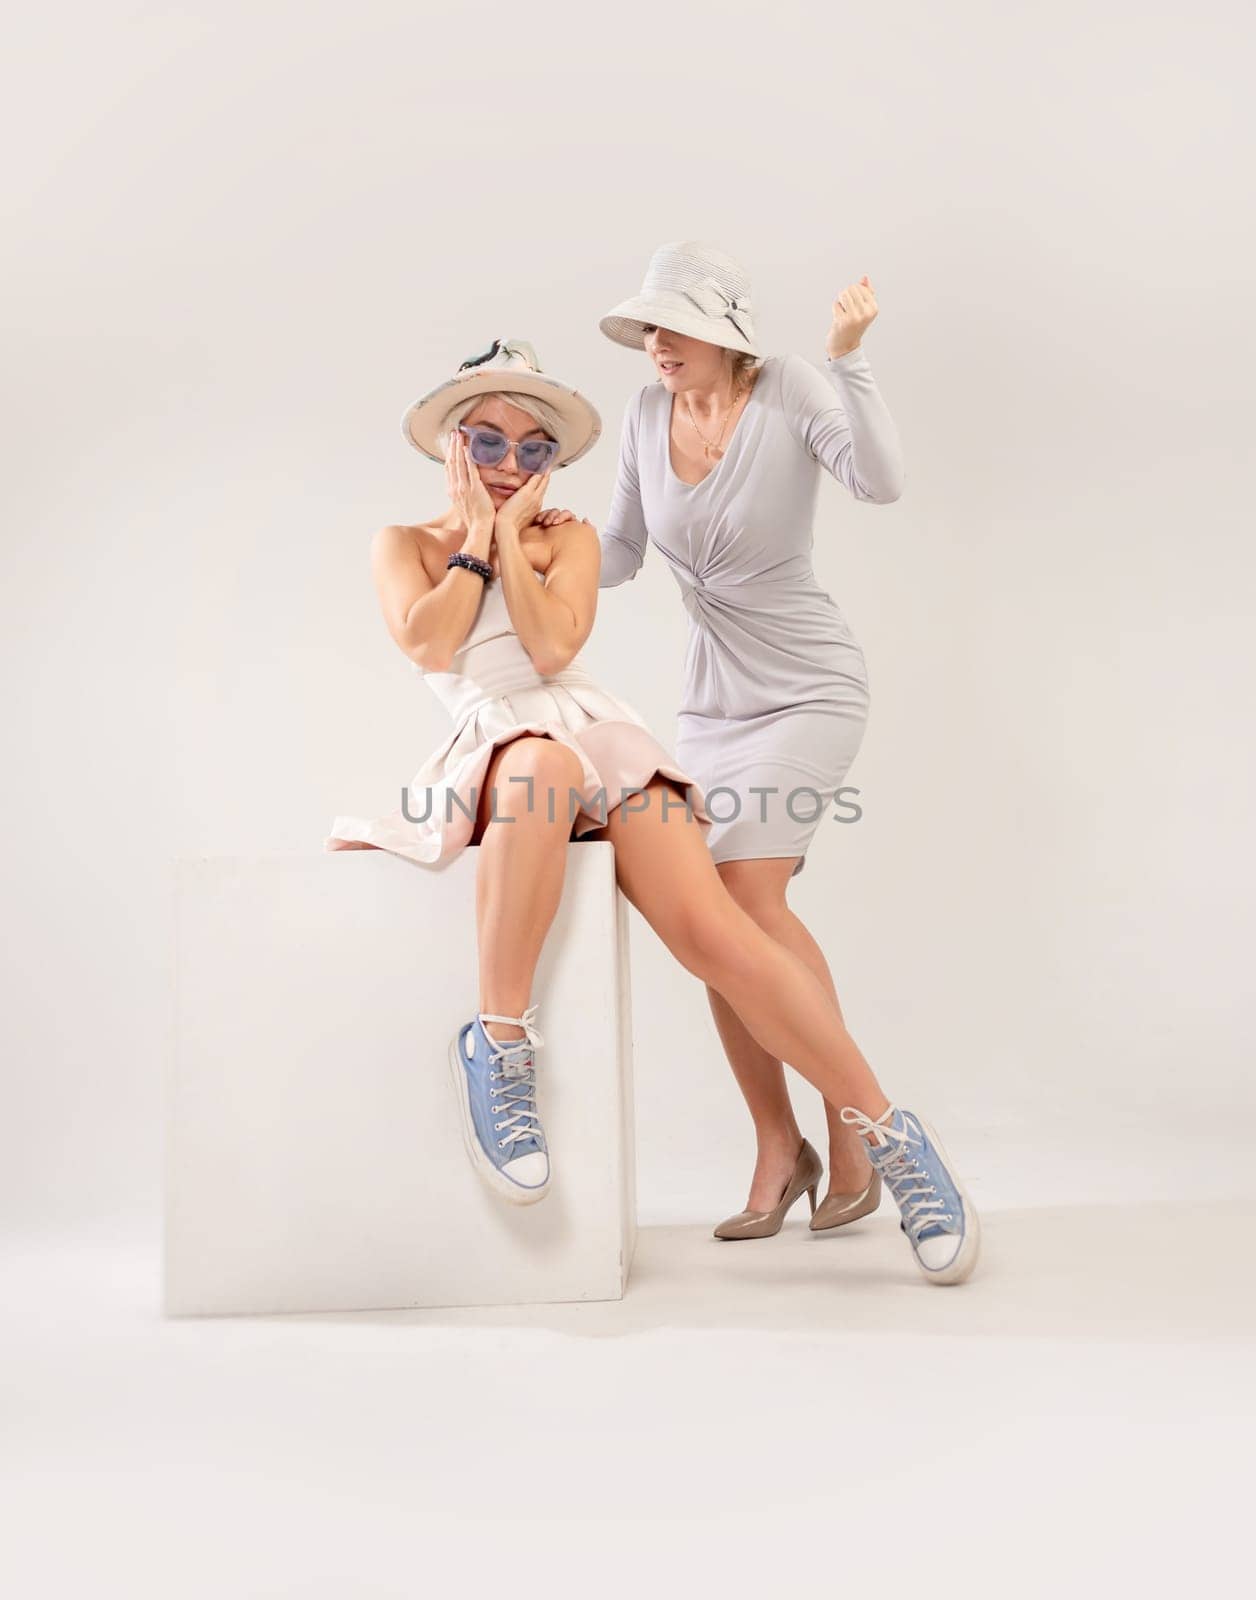 two girls in different styles of clothing playing a conflict or quarrel with each other on a white background, the psychology of human relations, the conflict of the inner child and parent